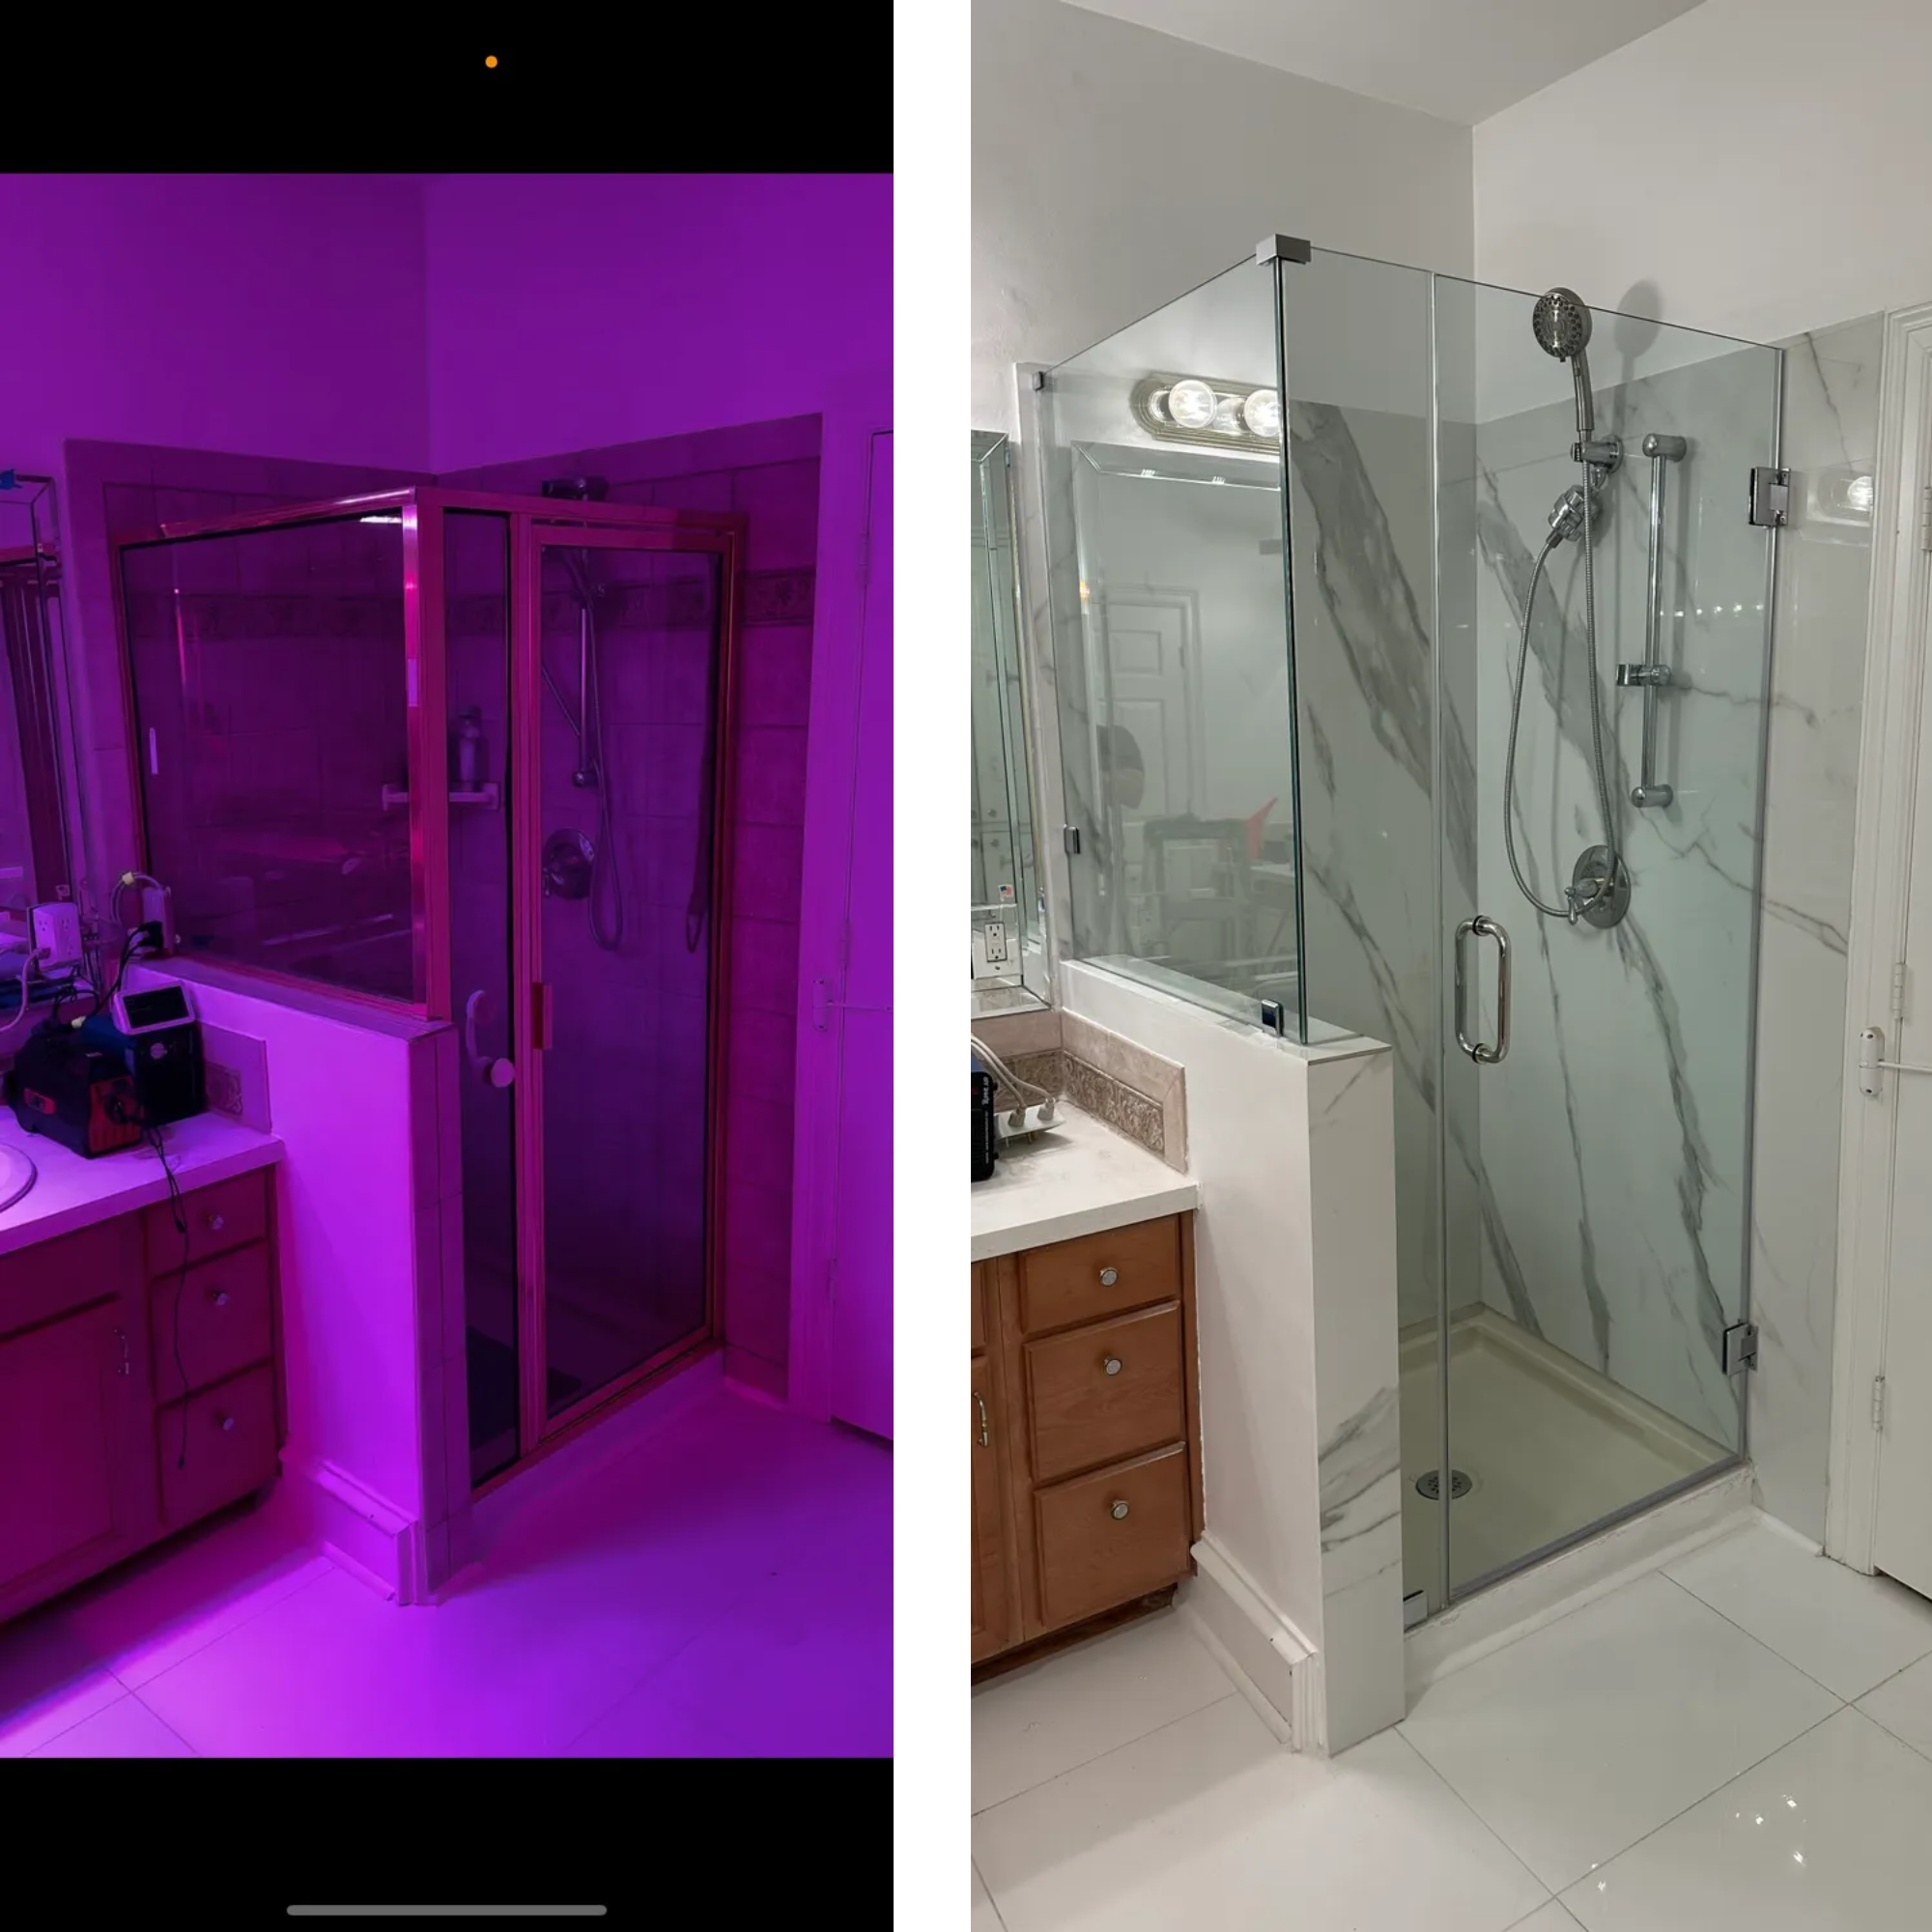 Before & After for Luxurious Construction in Houston, TX